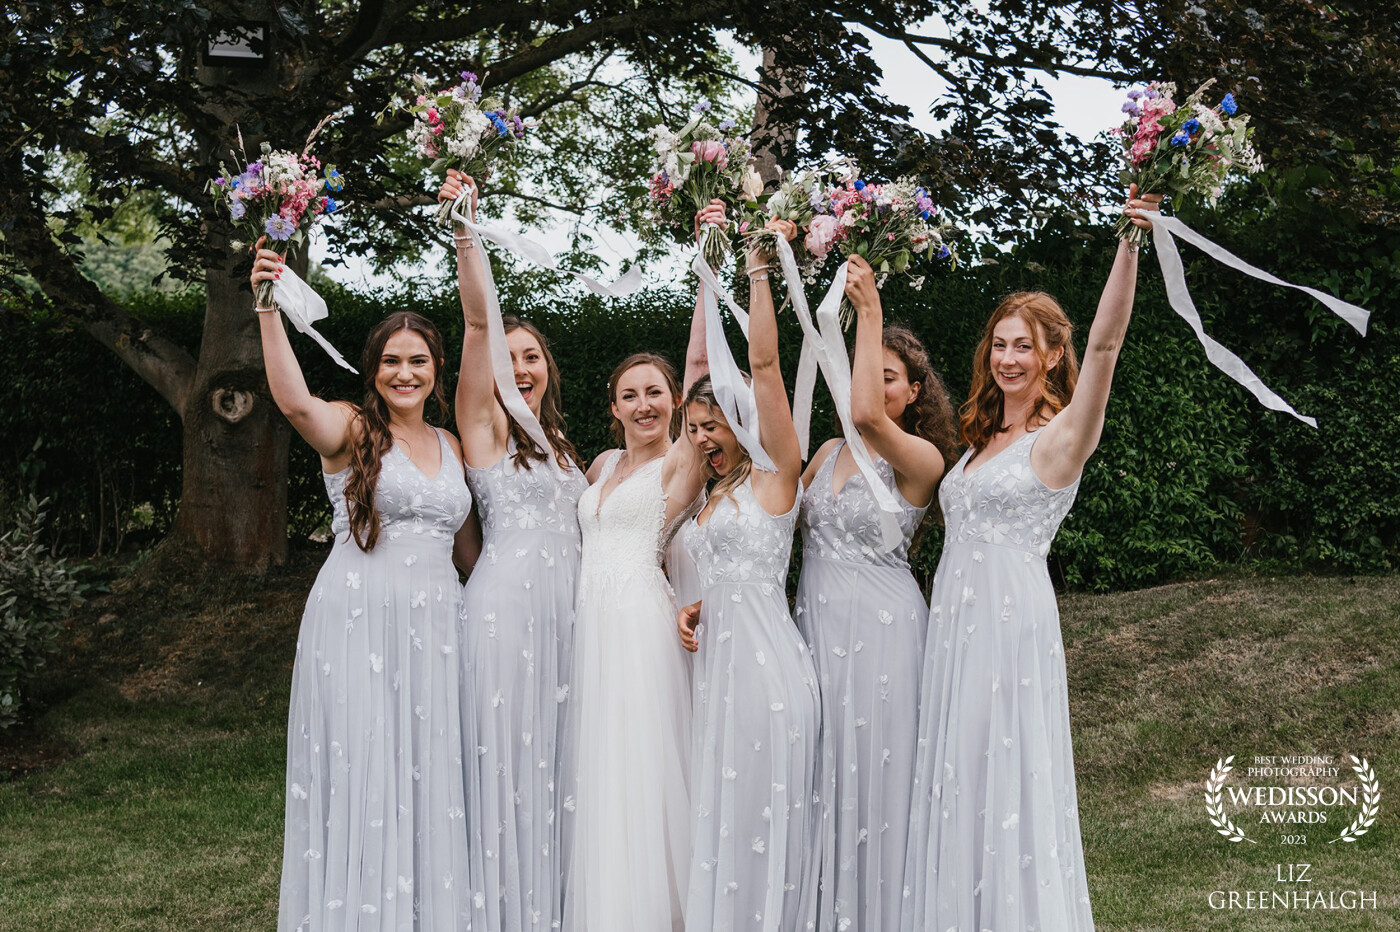 One of my favourite photos is getting all the Bridesmaids together